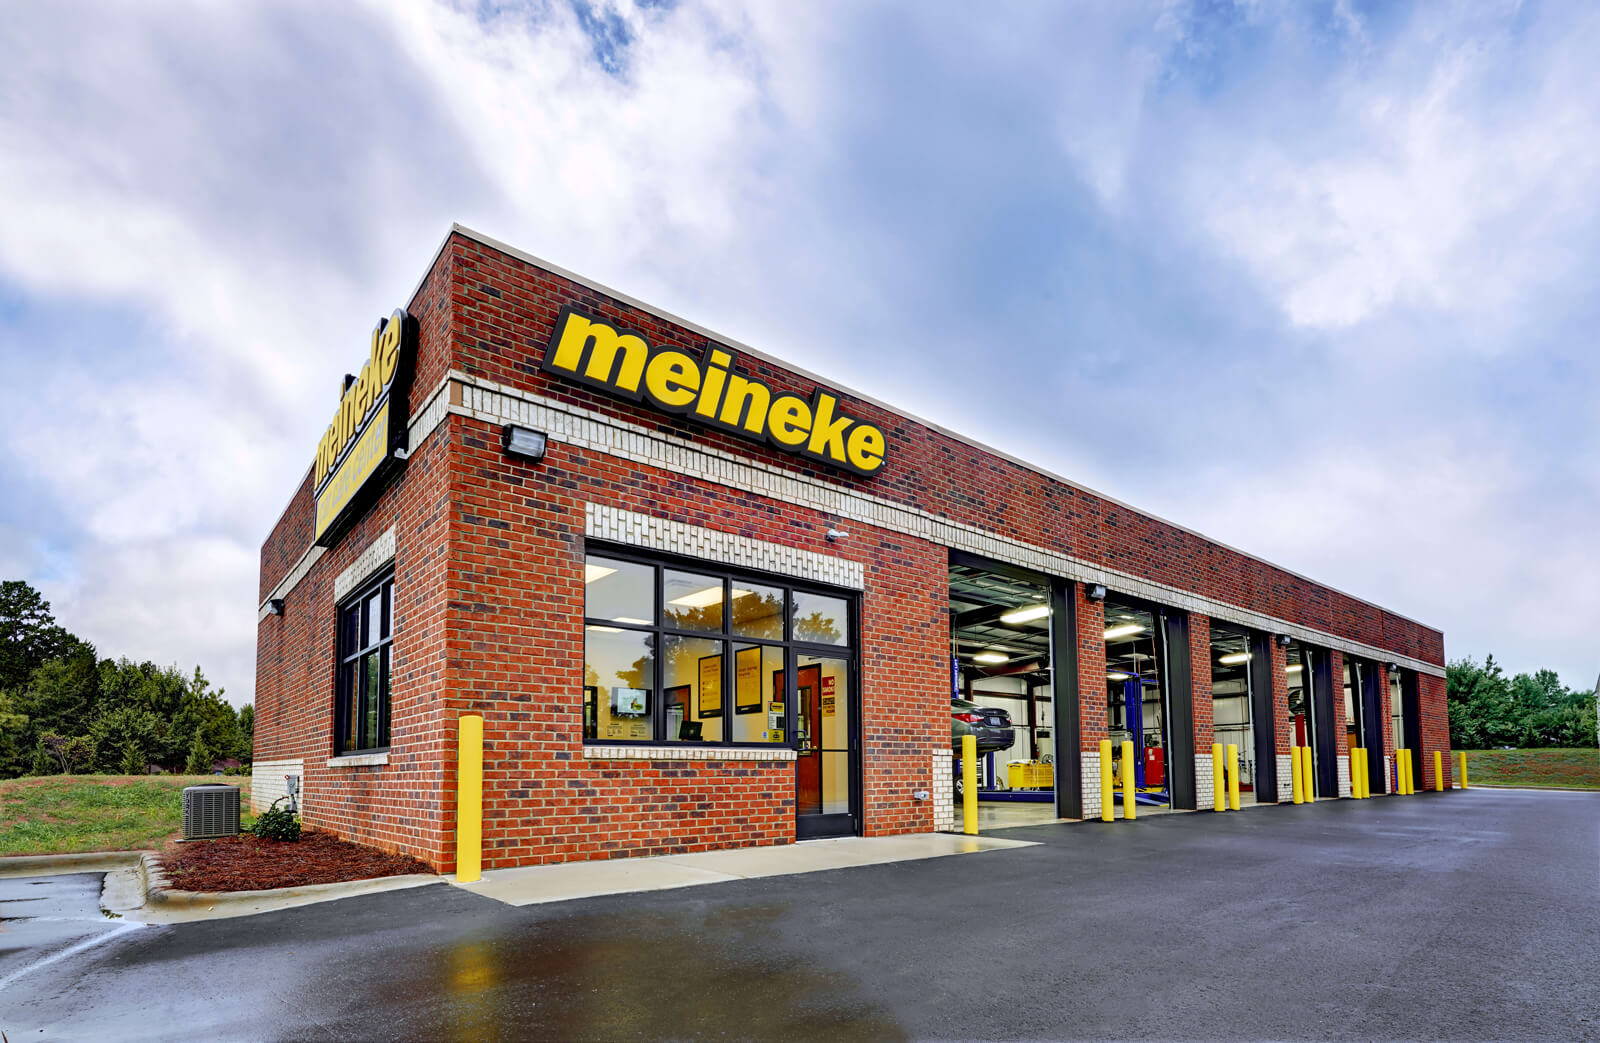 Auto Repair Franchise Opportunities Own a Meineke Franchise